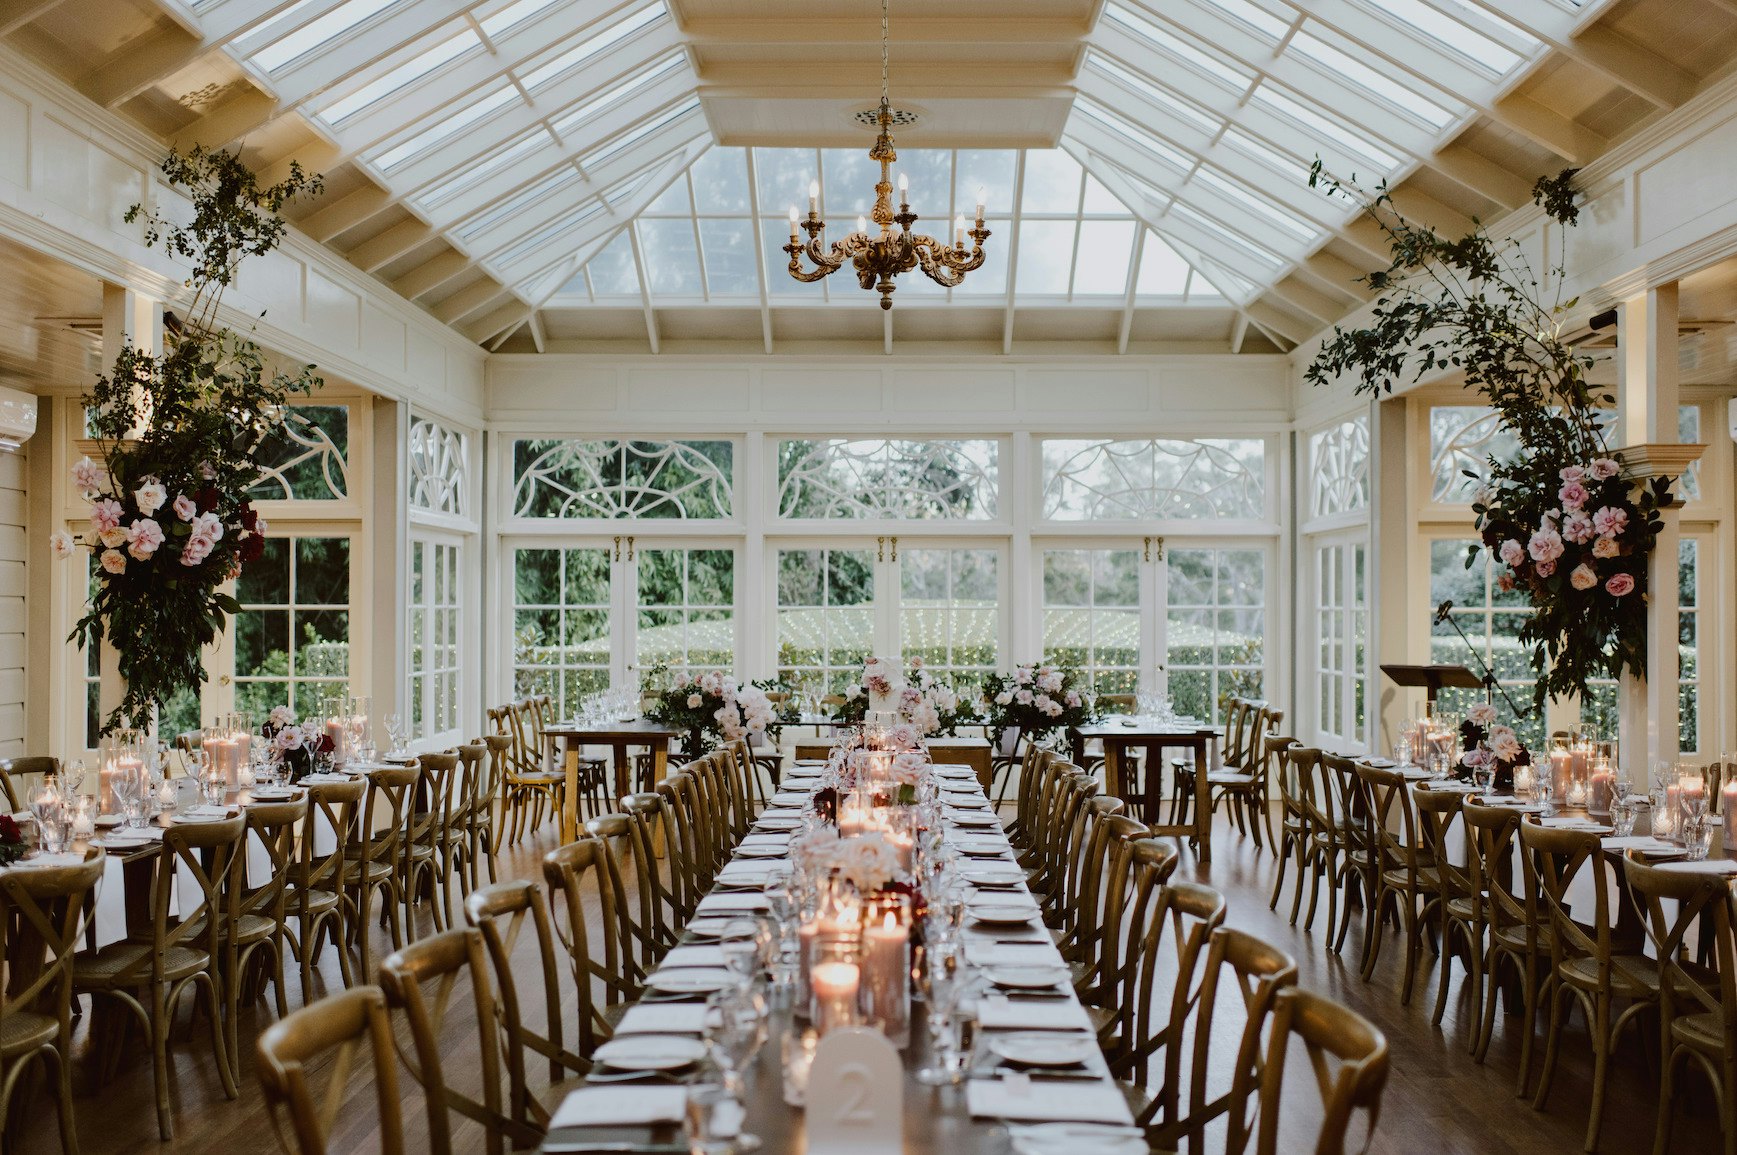 Wedding reception with wooden tables and candlelight